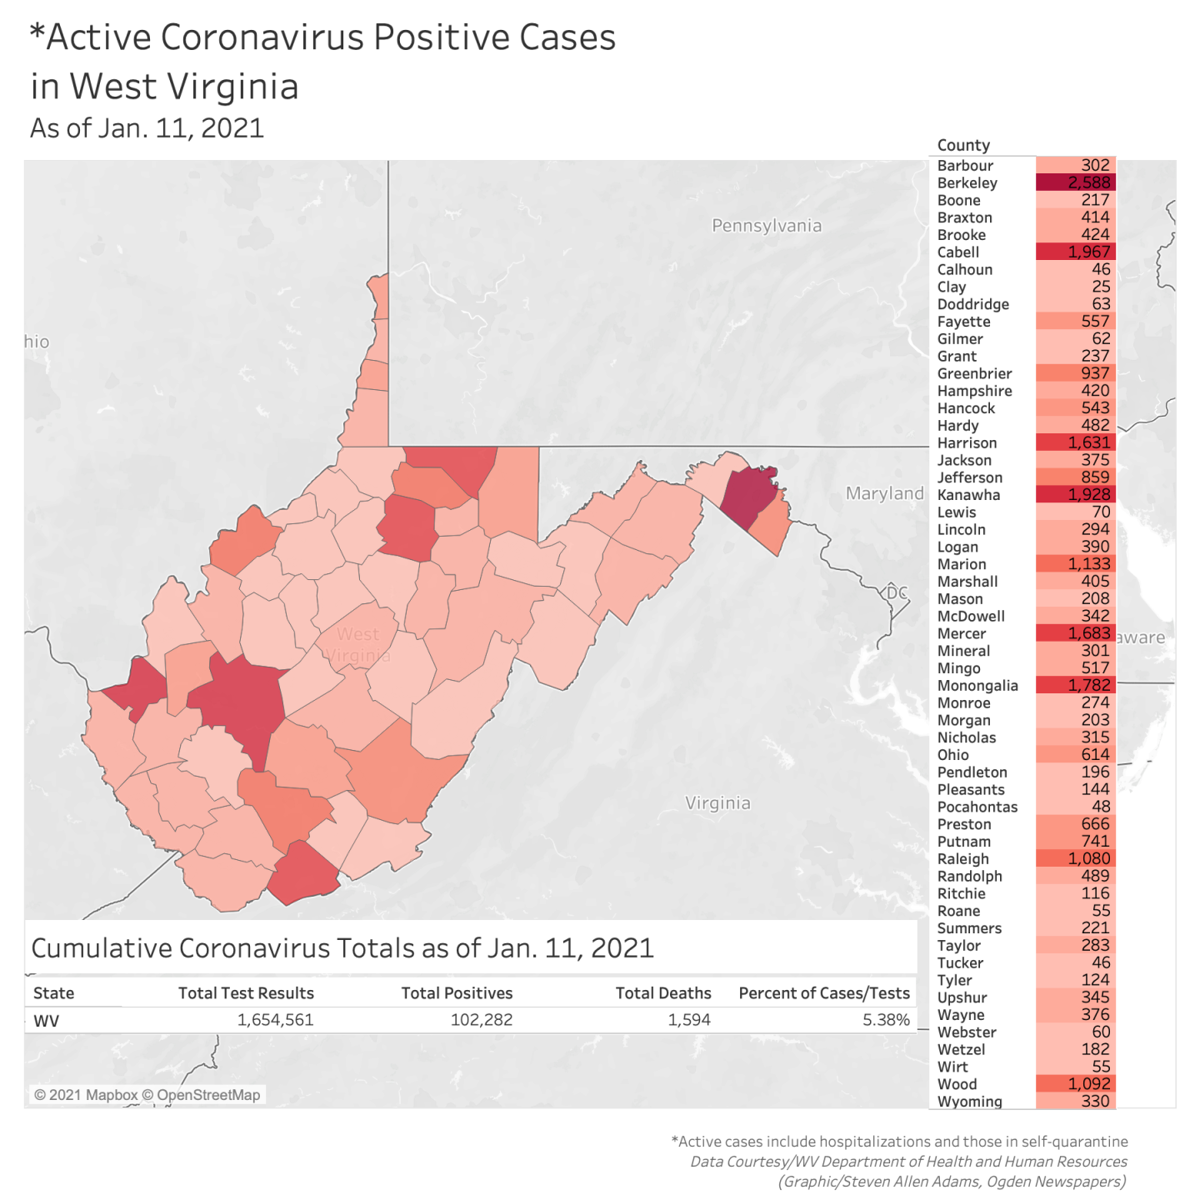 Vaccinations In W Va Continue Apace As Covid 19 Cases Break 100 000 Journal News Journal News Net